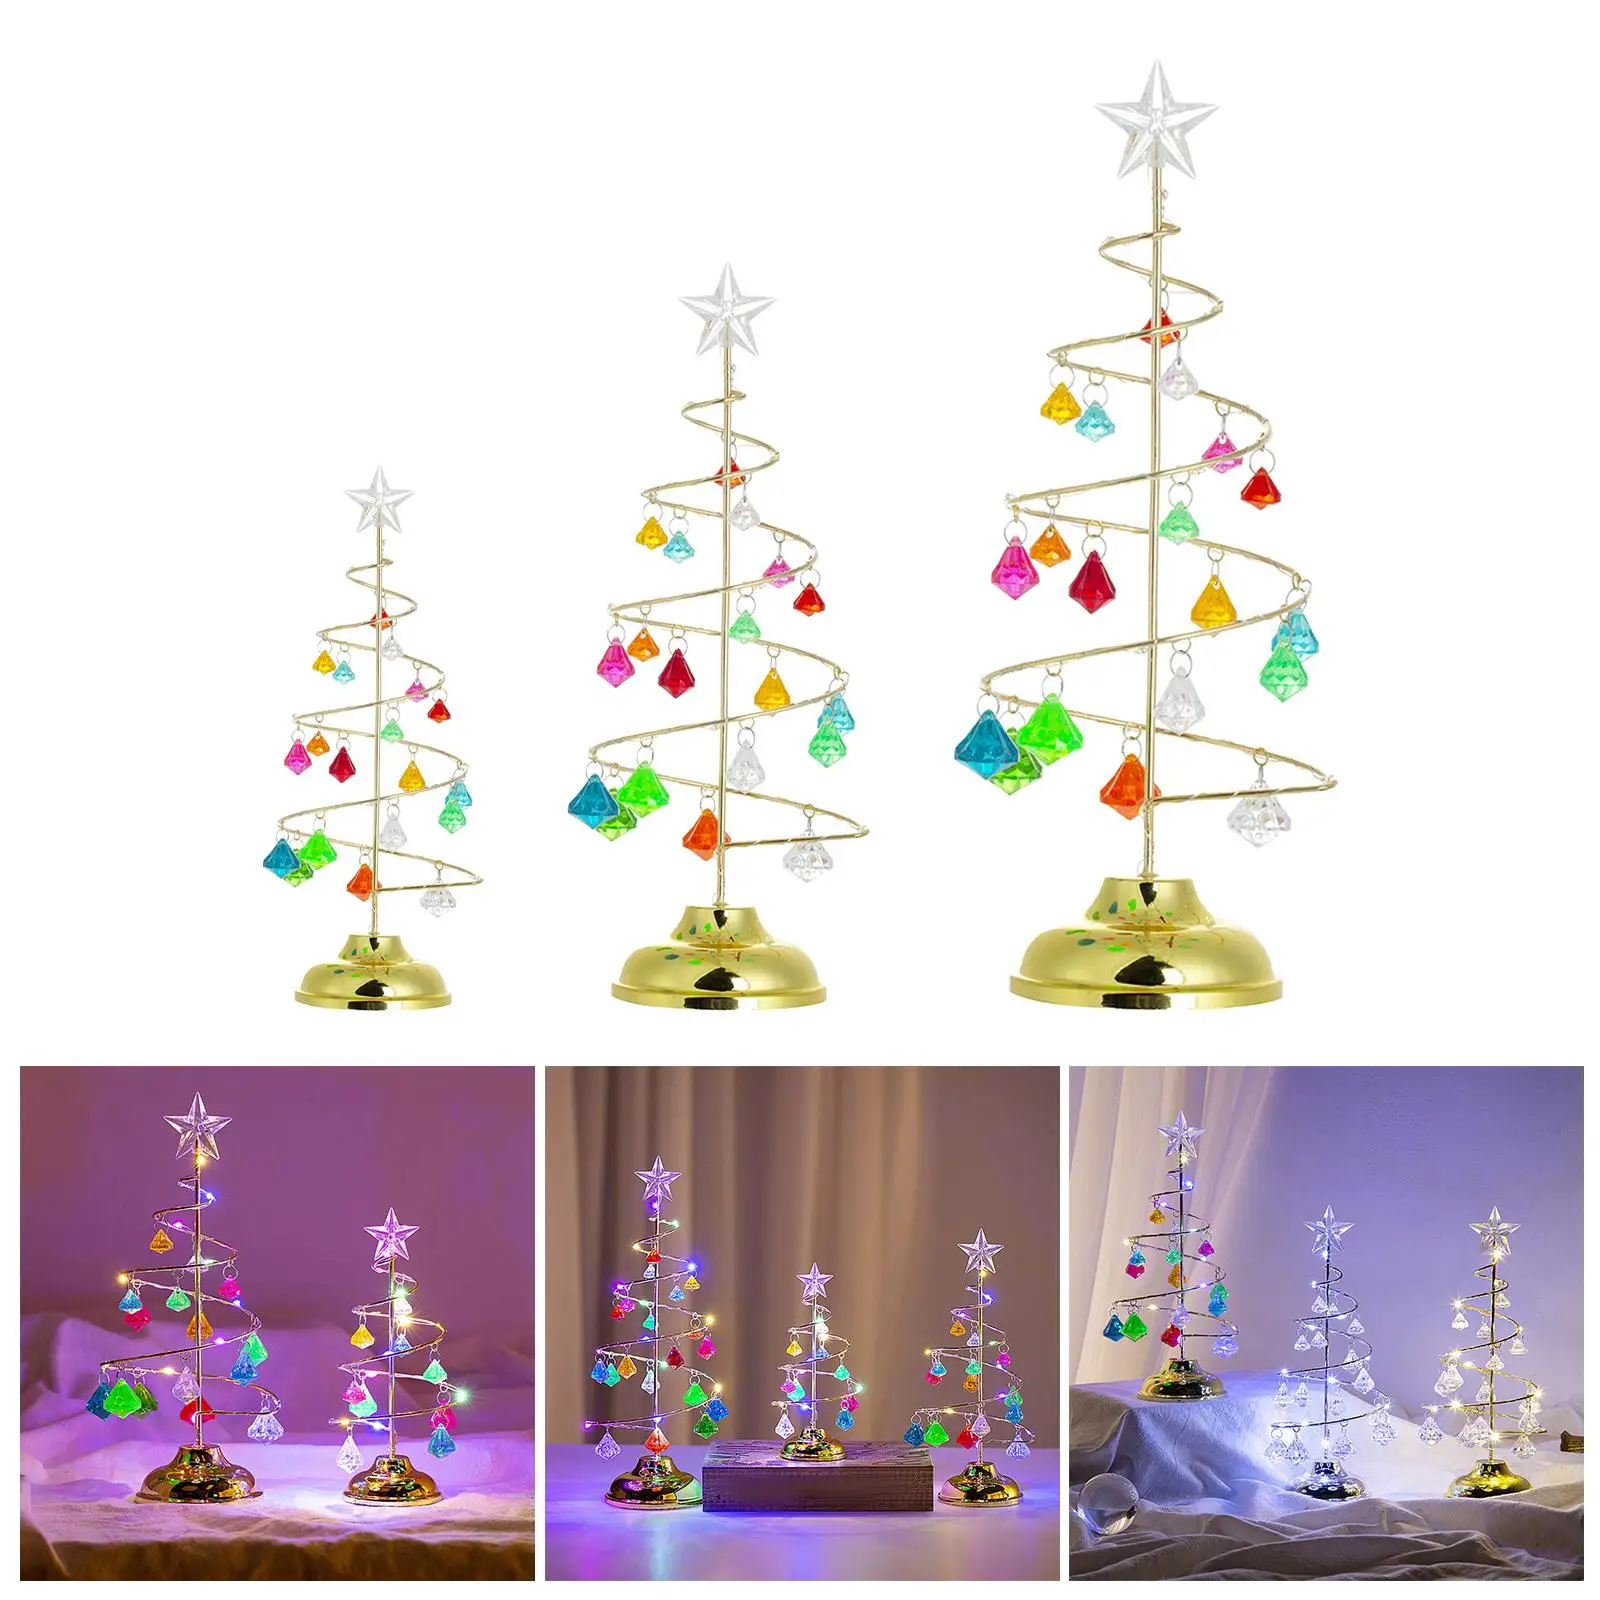 Lighted Christmas Tree Acrylic Charms Metal Stand Colorful Light for Holiday Bedroom Creative Gift Ornament